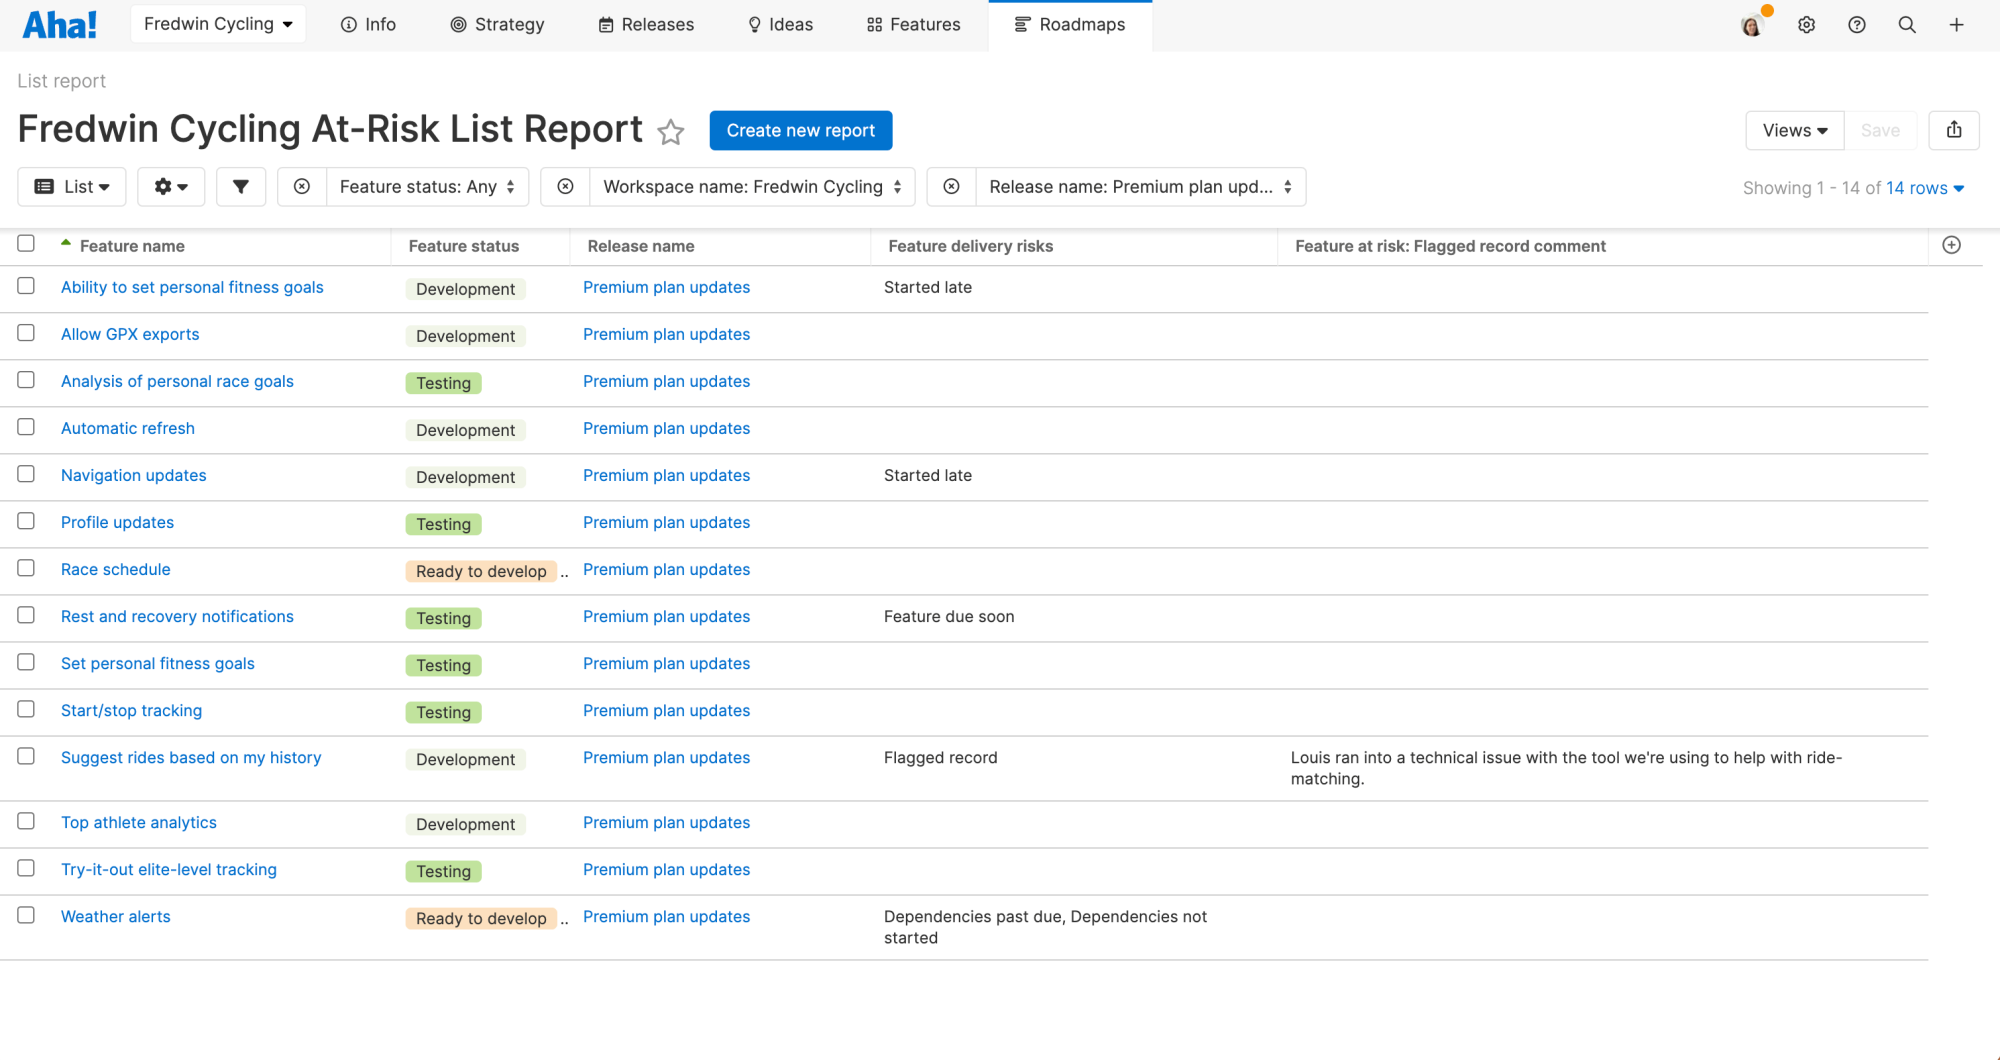 List report in Aha! Develop showing risk alerts.